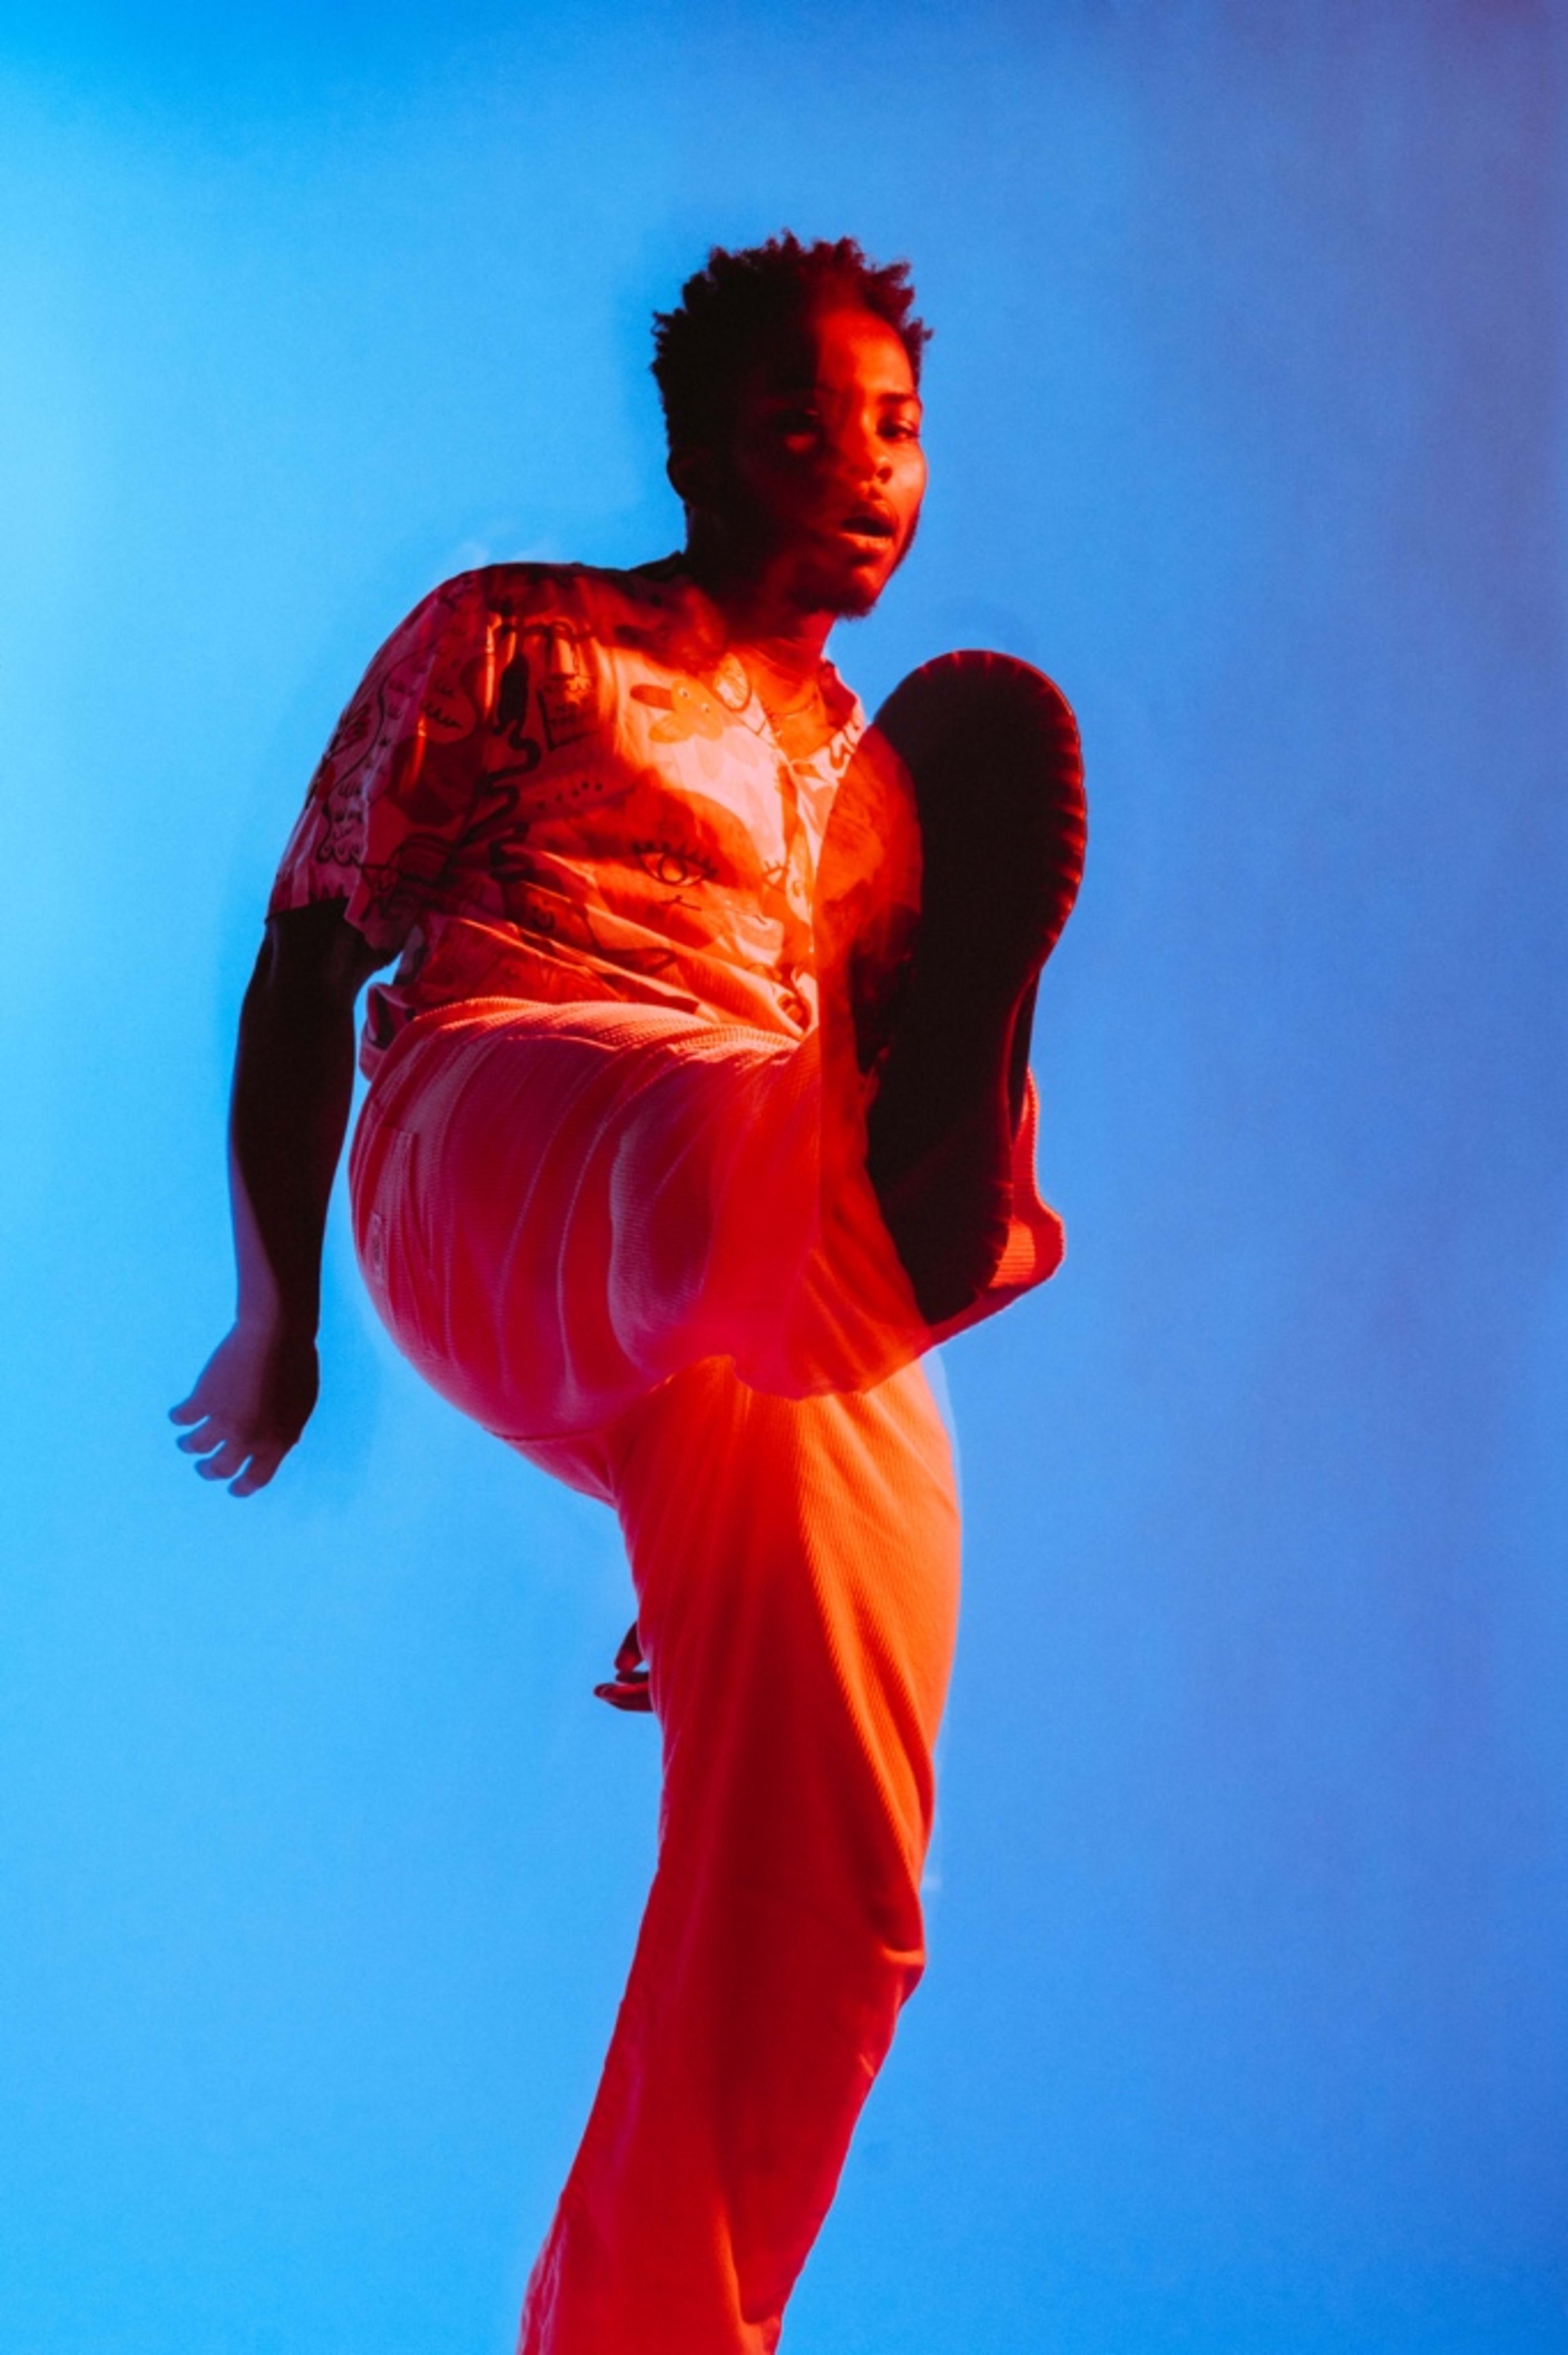 A person dressed in orange kicking during a photo shoot.